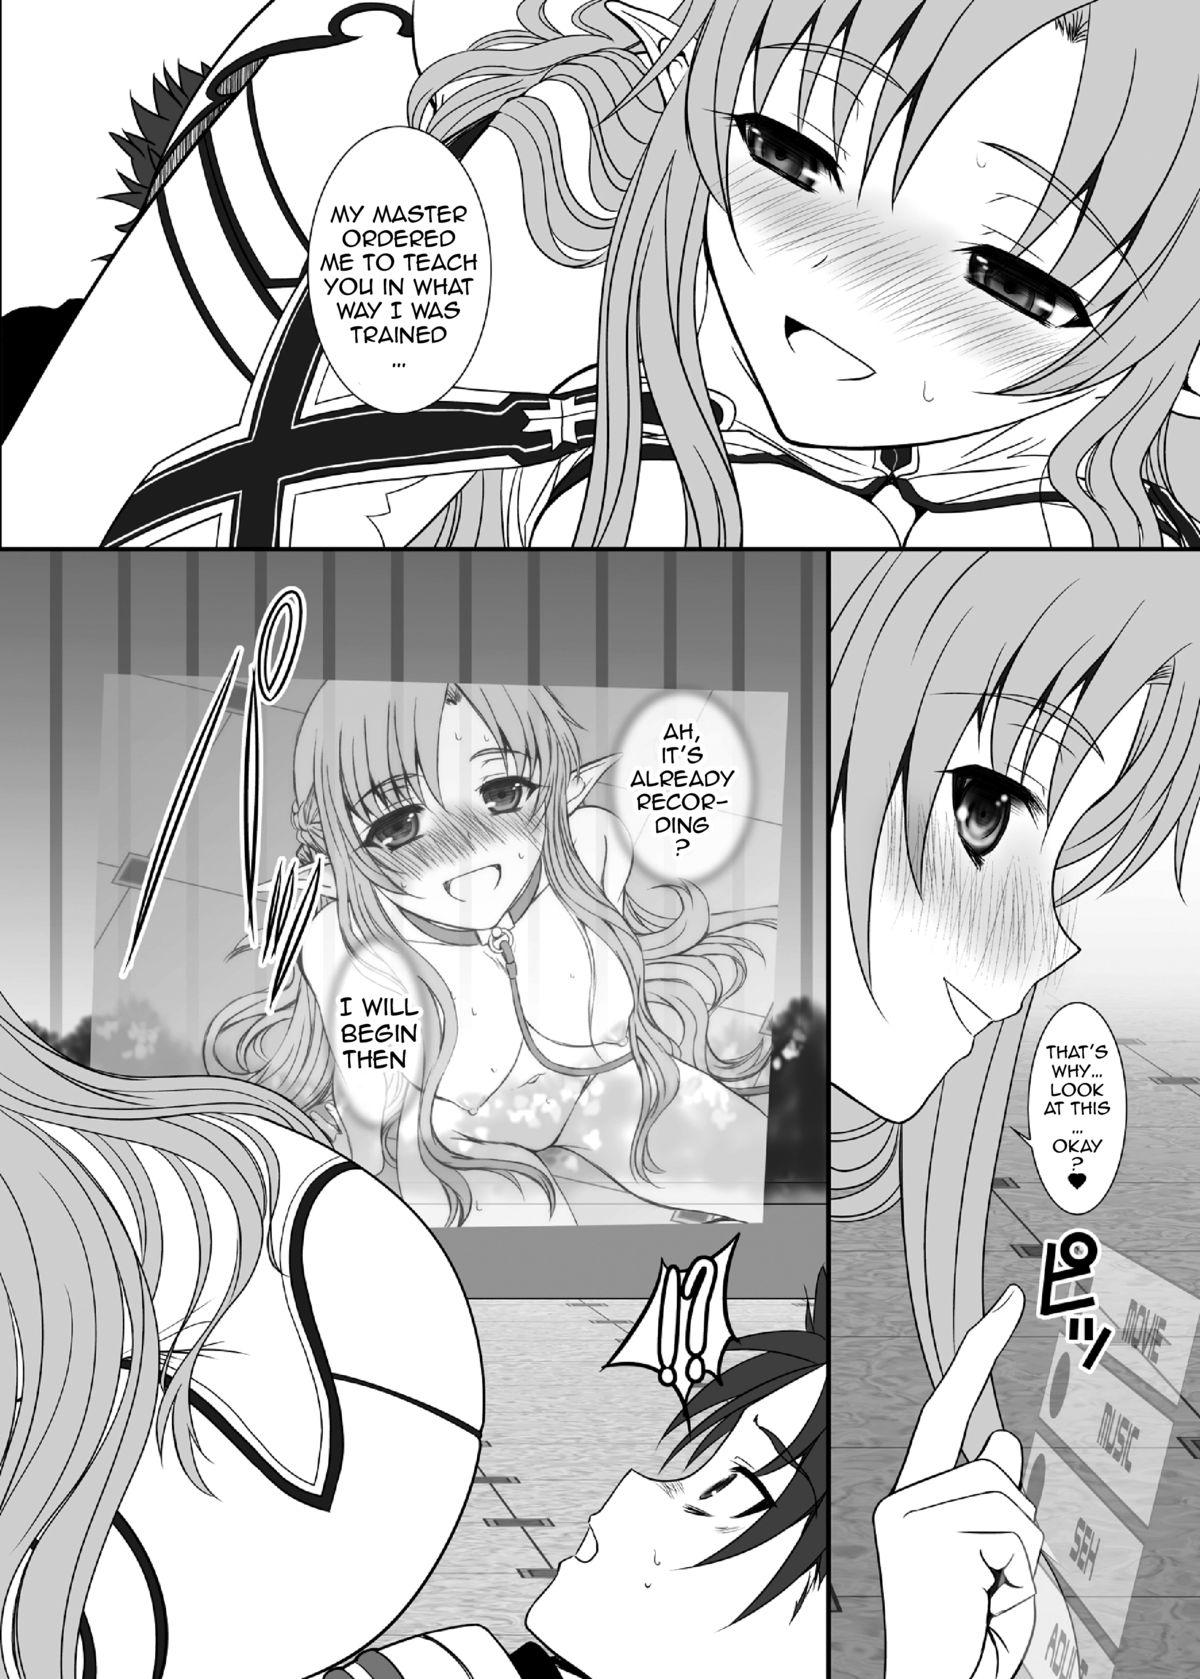 Awesome Slave Asuna On-Demand 2 - Sword art online Dick Suckers - Page 13